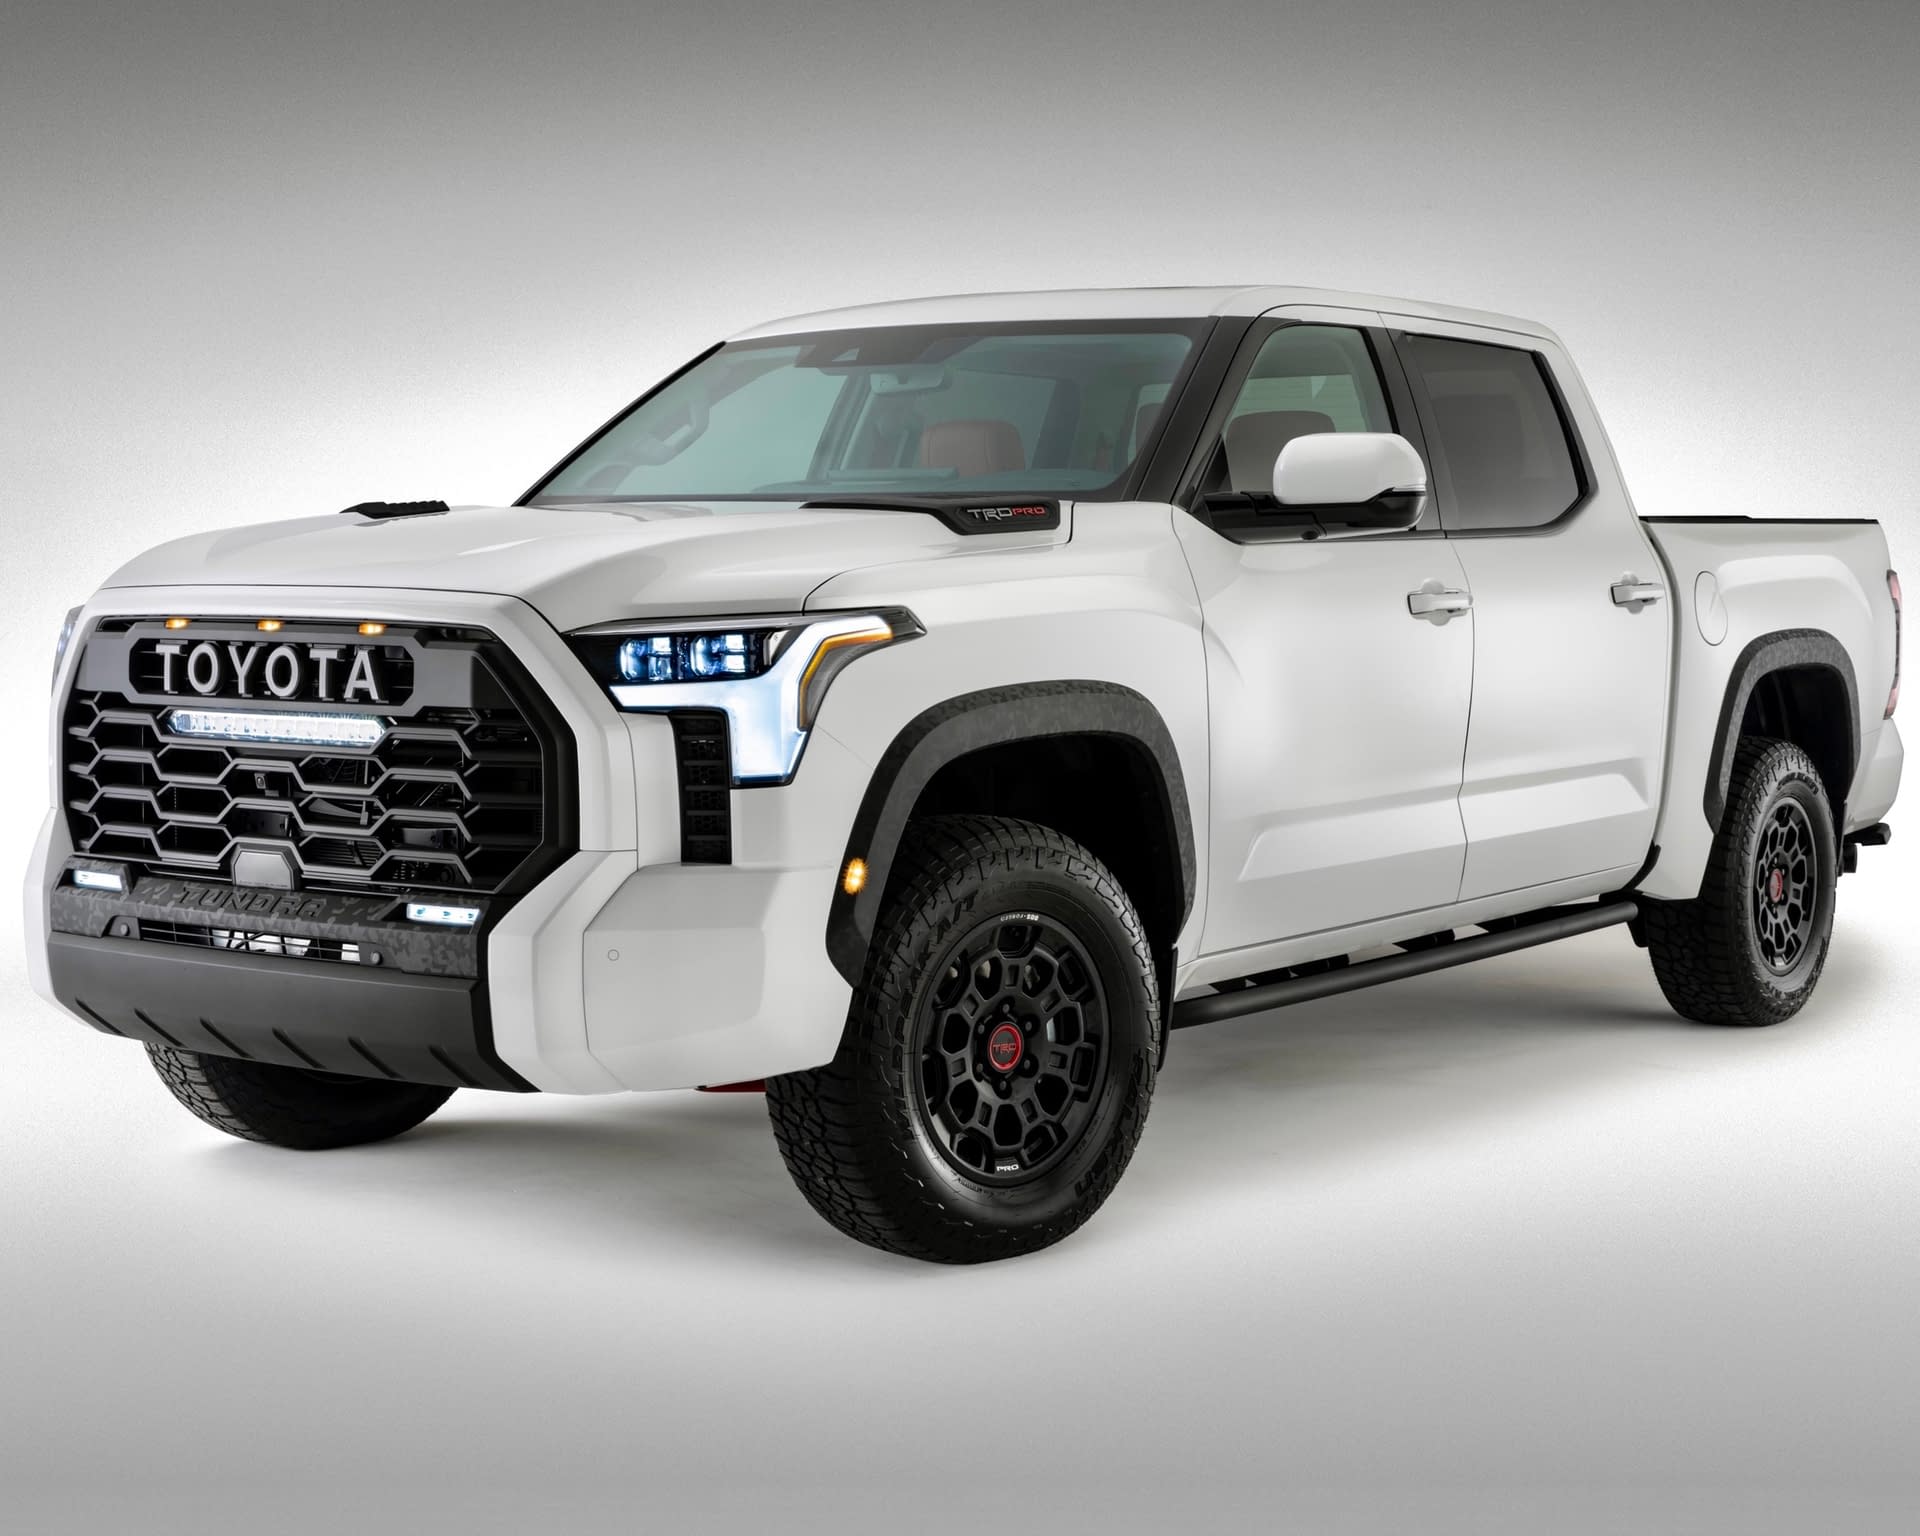 2022 Toyota Tundra Revealed After Leaked Images Appear ...